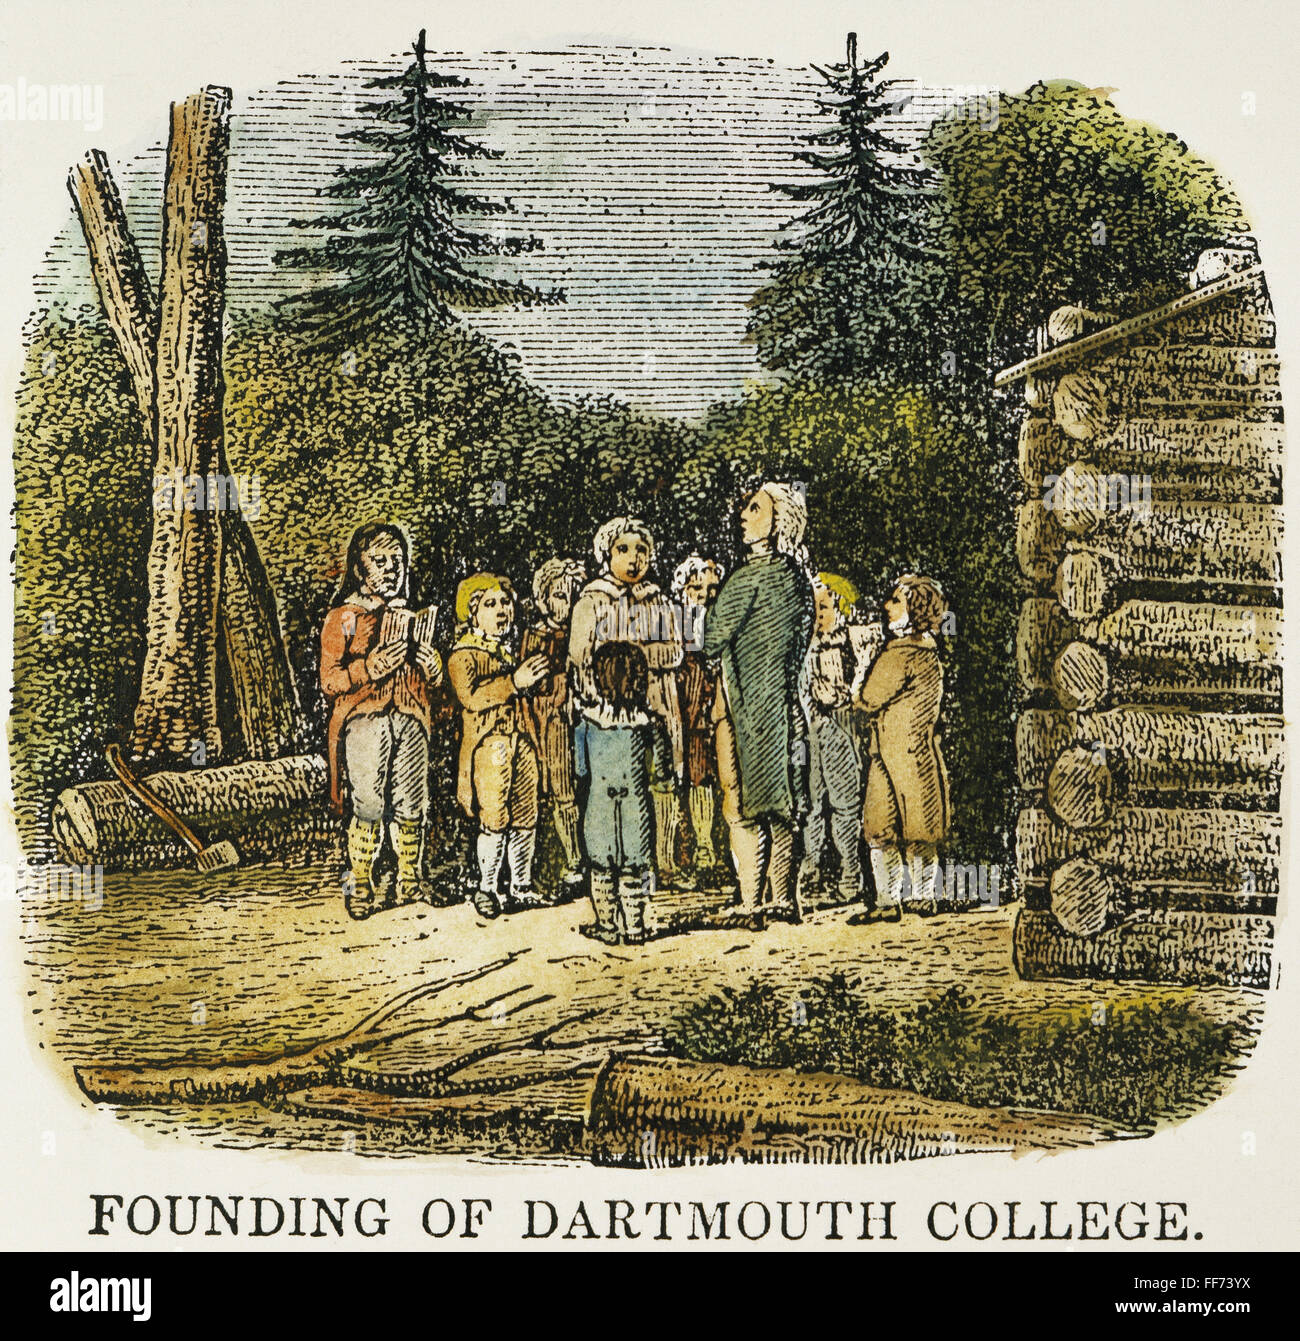 DARTMOUTH COLLEGE, 1770. /nThe founding of Dartmouth College at Hanover, New Hampshire, by Eleazar Wheelock in 1770. Wood engraving, American, c1845. Stock Photo